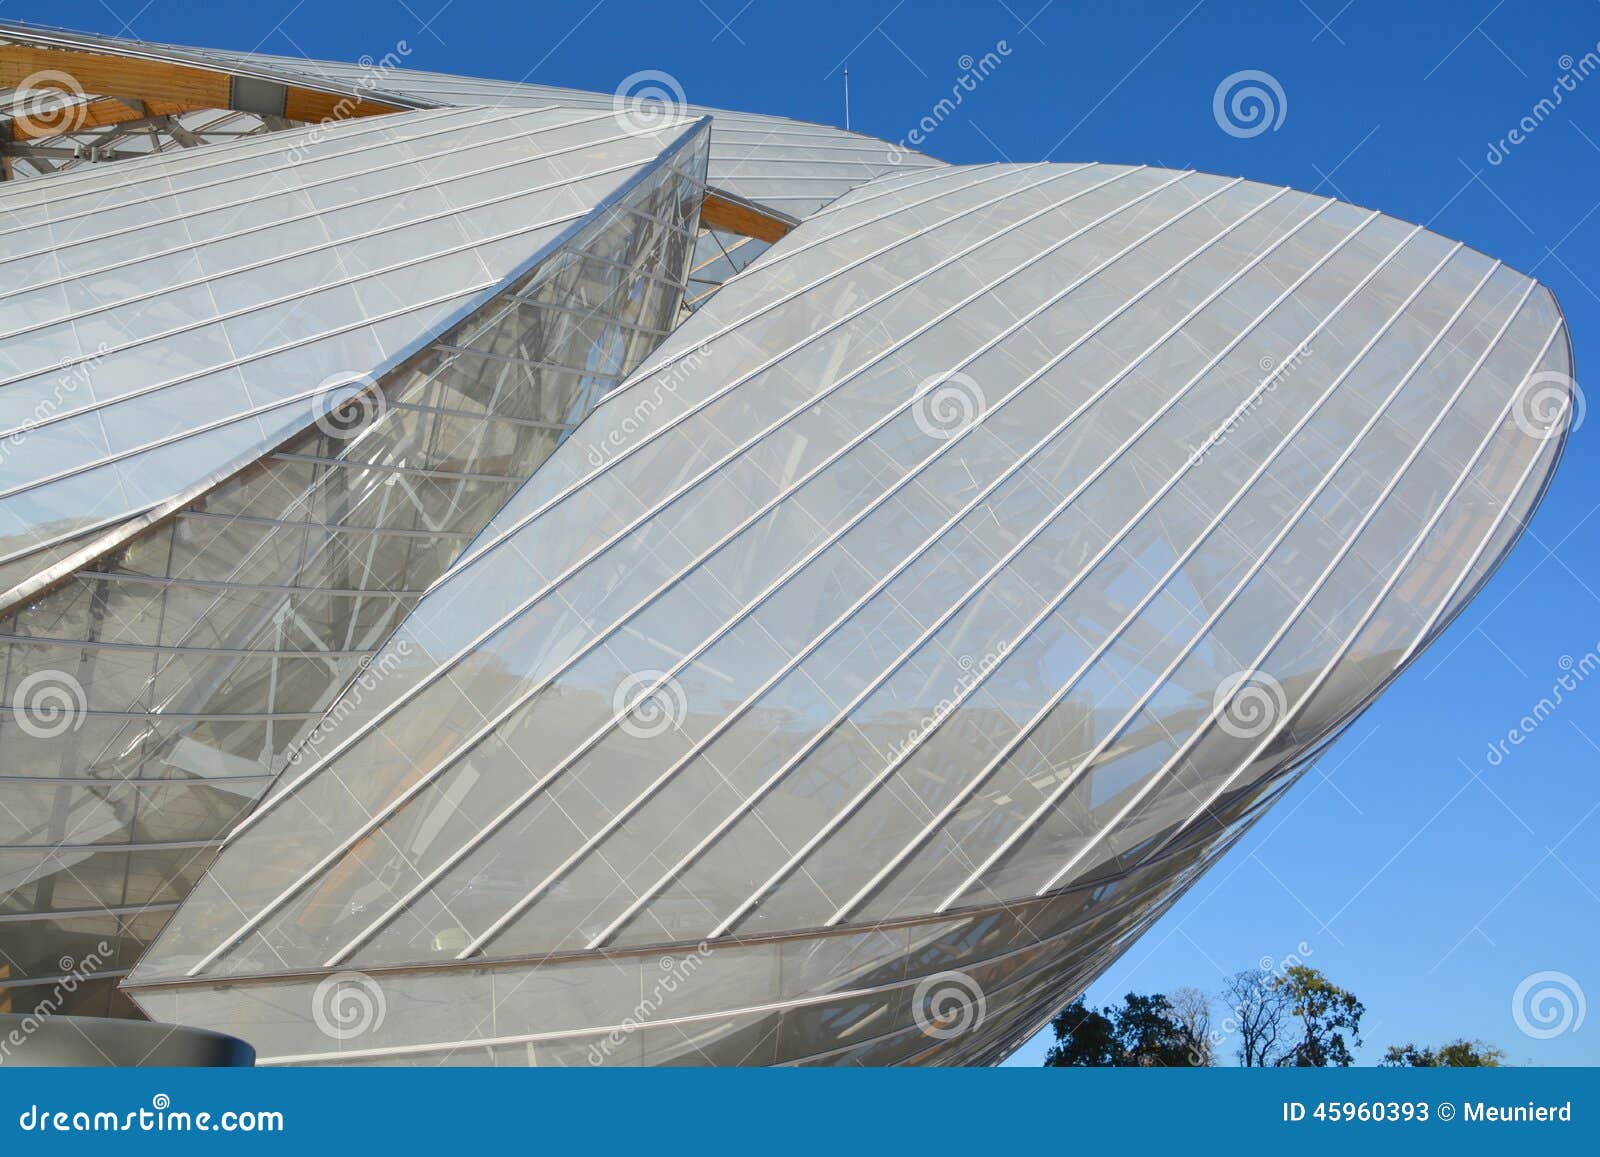 Louis Vuitton Foundation editorial stock photo. Image of 2006 - 45960393